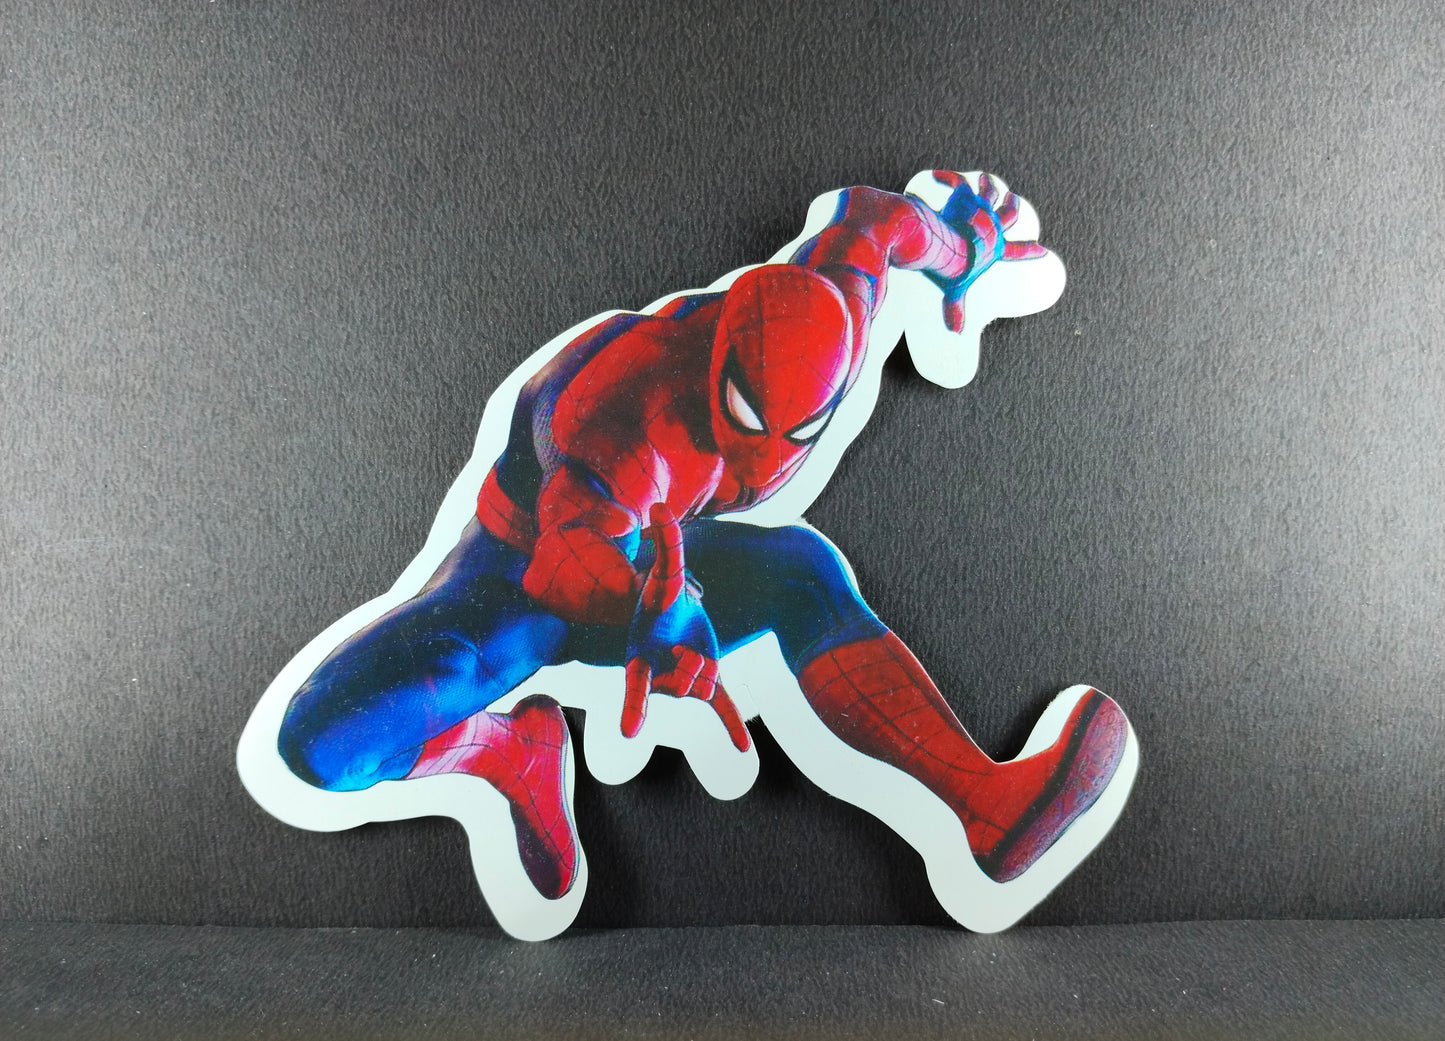 Birthday Decoration Kit - Spiderman Theme for Simple Birthday Decorations at Home